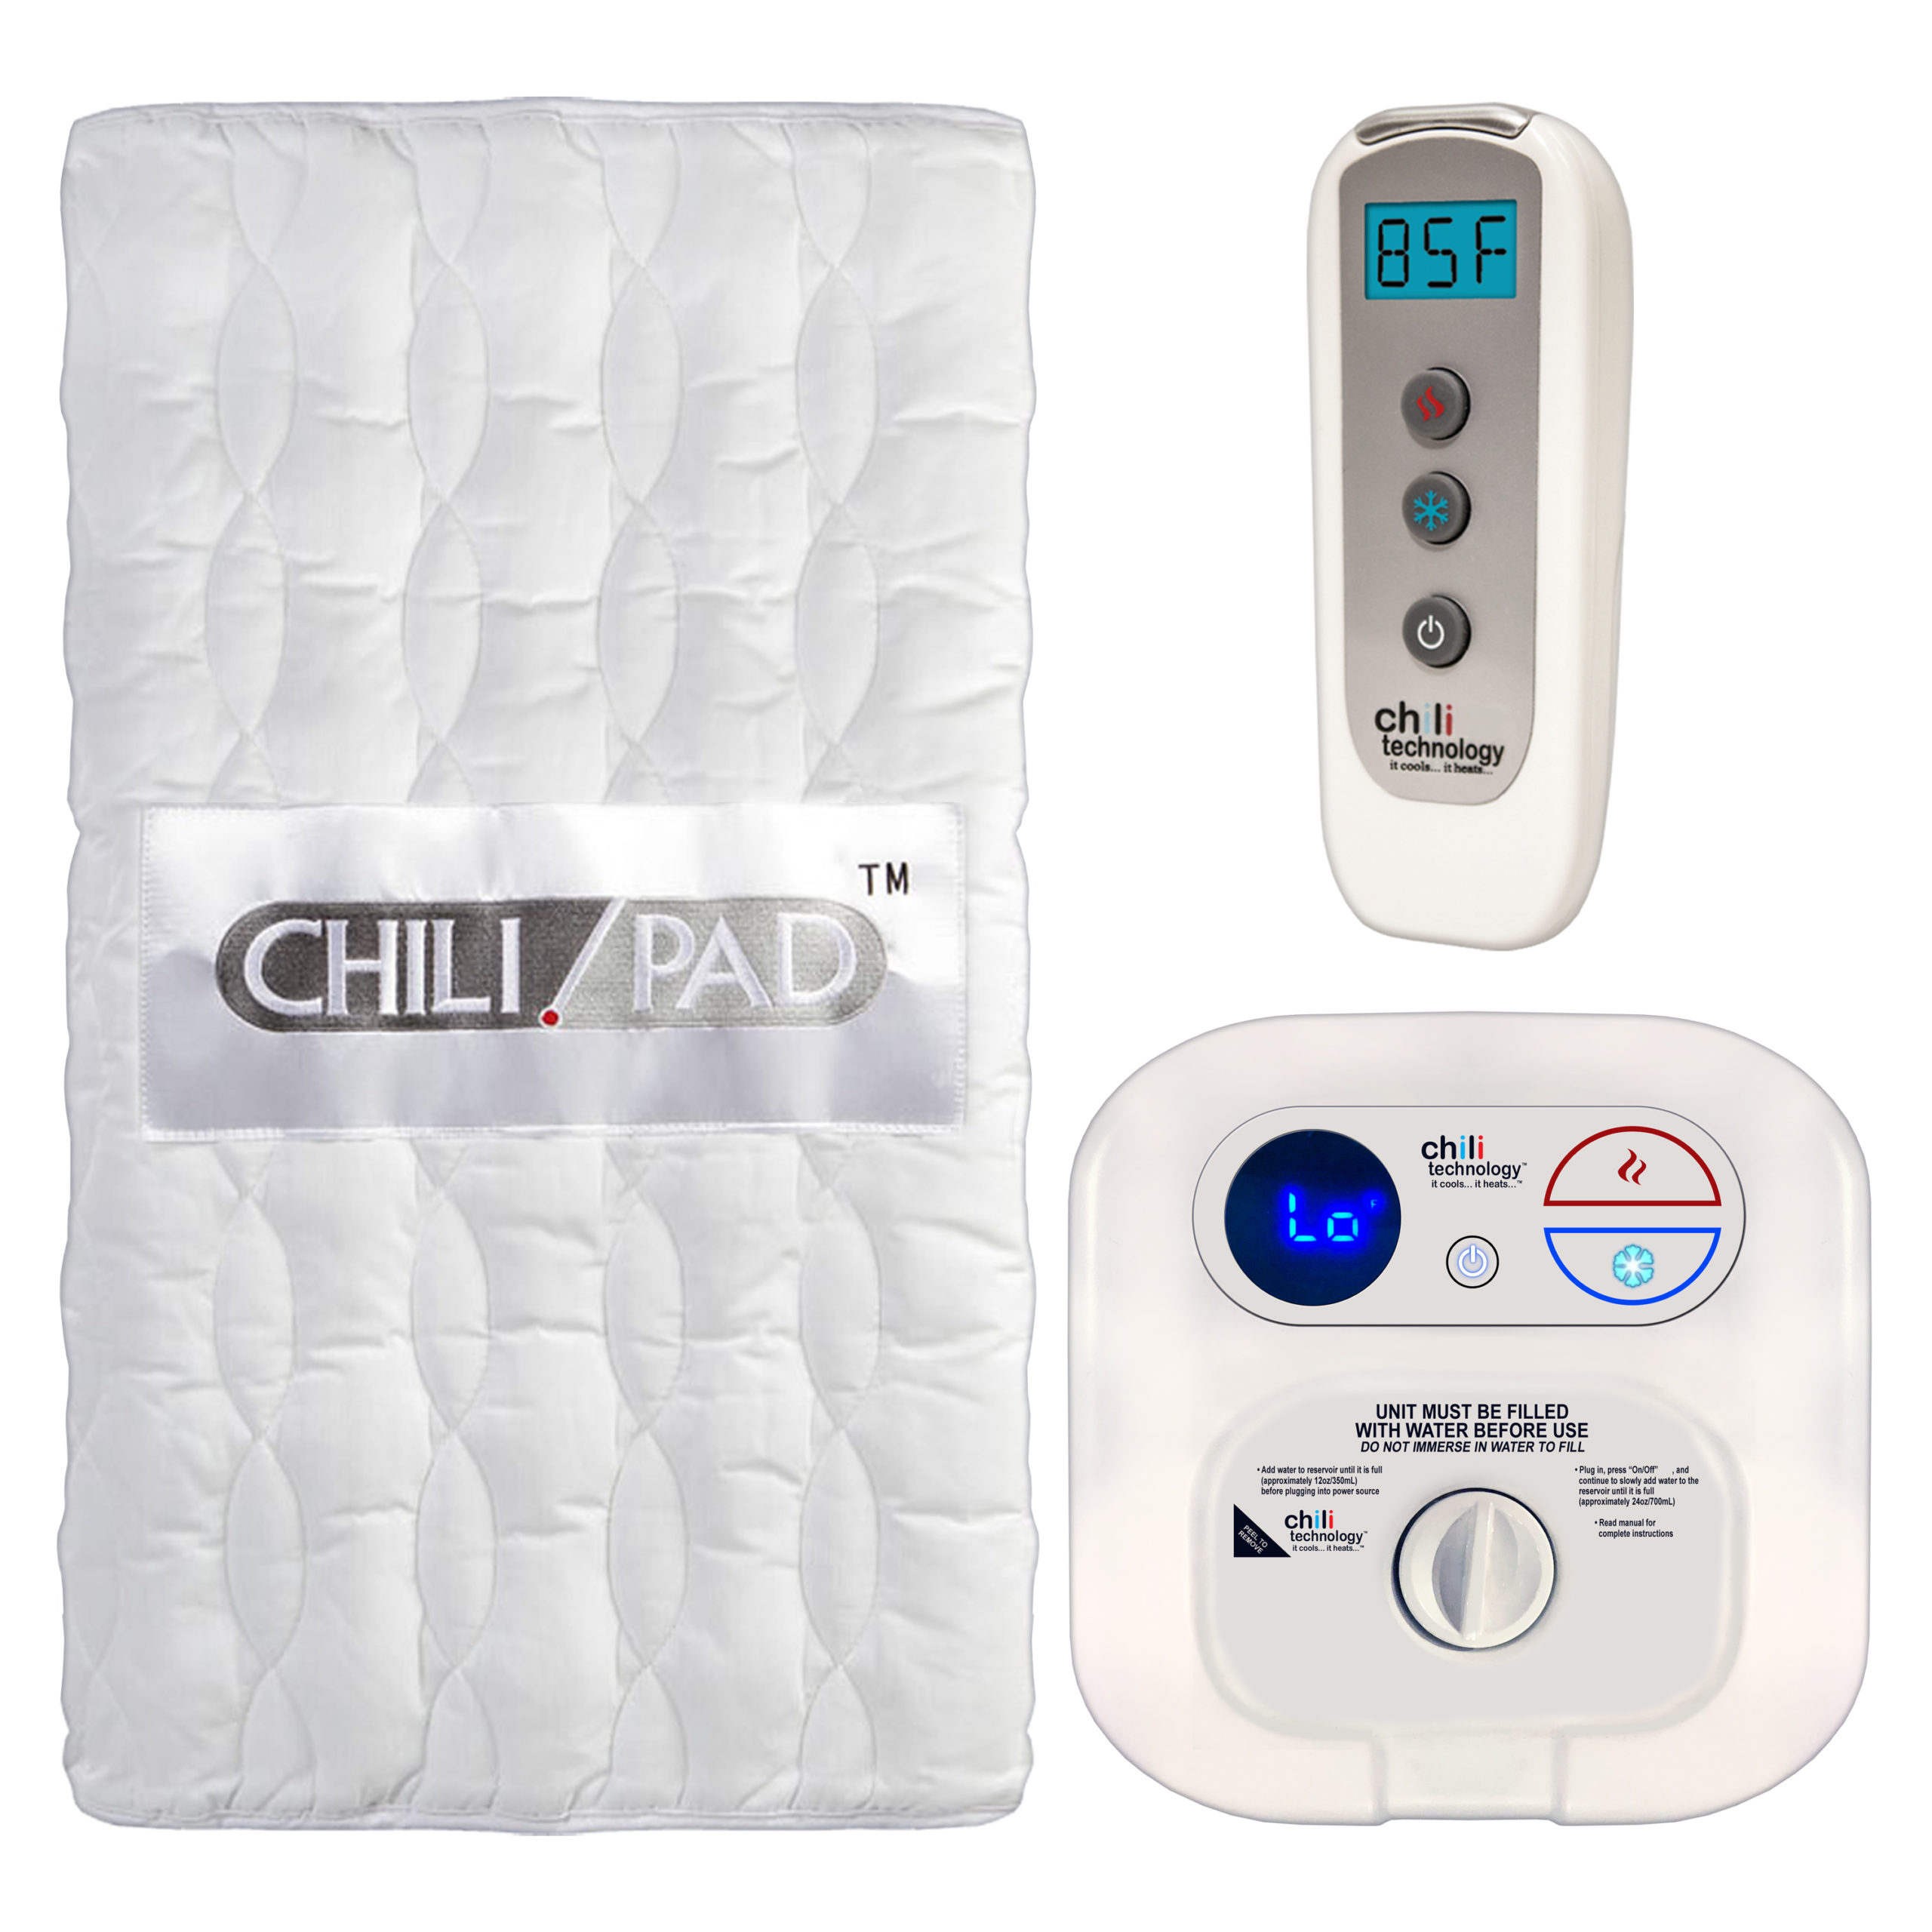 Sleep Discounts - Chilipad|Temperature|Mattress|Cube|Sleep|Bed|Water|System|Pad|Ooler|Control|Unit|Night|Bedjet|Technology|Side|Air|Product|Review|Body|Time|Degrees|Noise|Price|Pod|Tubes|Heat|Device|Cooling|Room|King|App|Features|Size|Cover|Sleepers|Sheets|Energy|Warranty|Quality|Mattress Pad|Control Unit|Cube Sleep System|Sleep Pod|Distilled Water|Remote Control|Sleep System|Desired Temperature|Water Tank|Chilipad Cube|Chili Technology|Deep Sleep|Pro Cover|Ooler Sleep System|Hydrogen Peroxide|Cool Mesh|Sleep Temperature|Fitted Sheet|Pod Pro|Sleep Quality|Smartphone App|Sleep Systems|Chilipad Sleep System|New Mattress|Sleep Trial|Full Refund|Mattress Topper|Body Heat|Air Flow|Chilipad Review